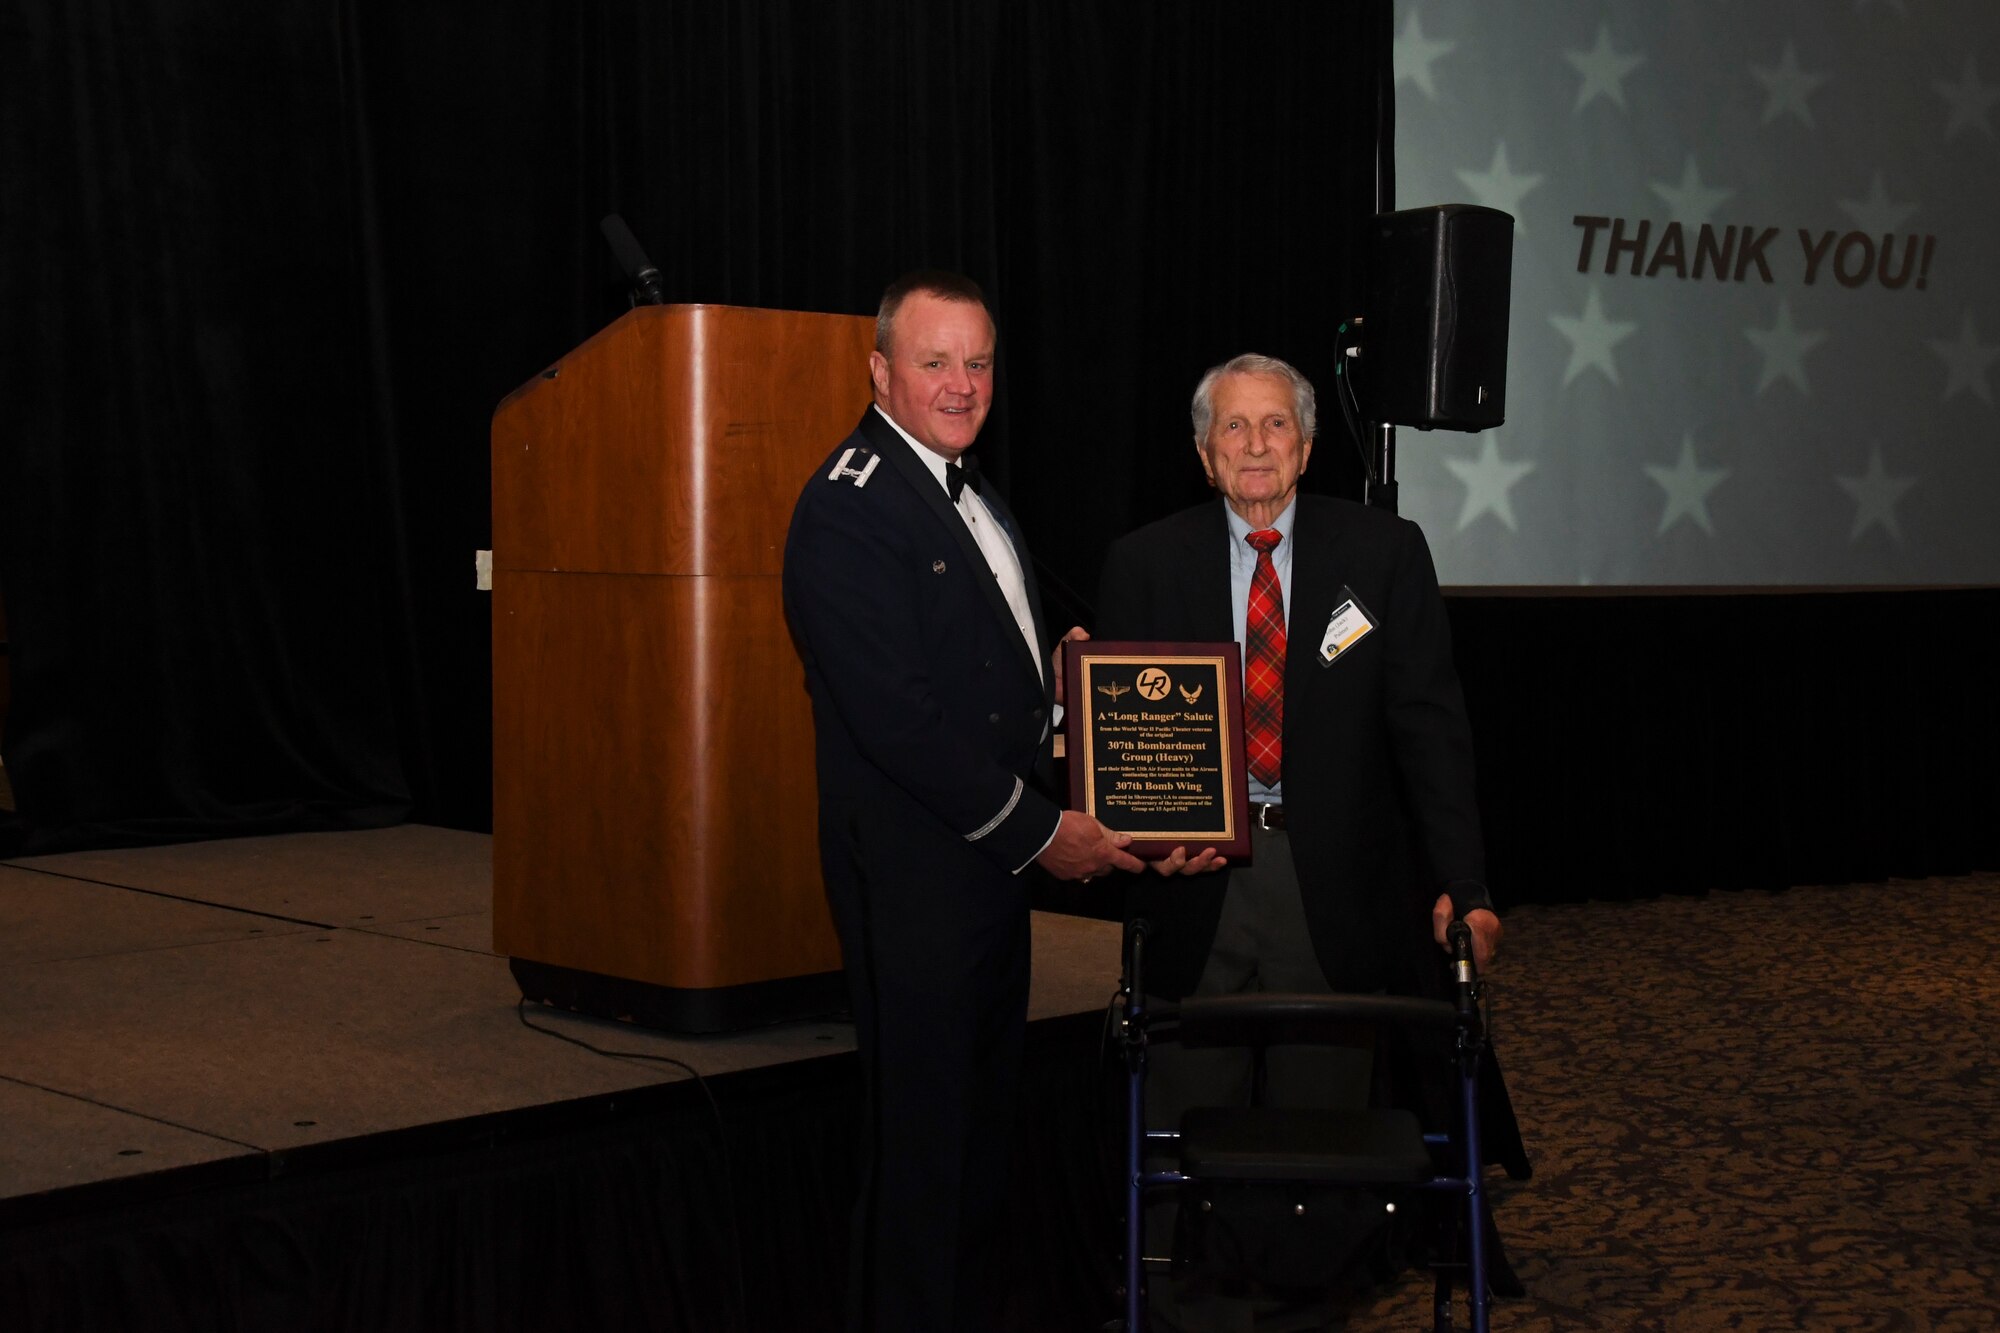 Col. Bruce R. Cox, 307th Bomb Wing commander, is presented a plaque by John Palmer, World War II 307th Bombardment Group veteran, from the 307th Bombardment Group alumni during the 307th Bomb Wing’s 75th Anniversary and Awards Gala at the Shreveport Convention Center April 1, 2017. The reunion honored all past alumni of the 307th Bombardment Group and current 307th Bomb Wing members and showcased the history of the wing since its inception during World War II. (U.S. Air Force photo by Staff Sgt. Callie Ware/Released)